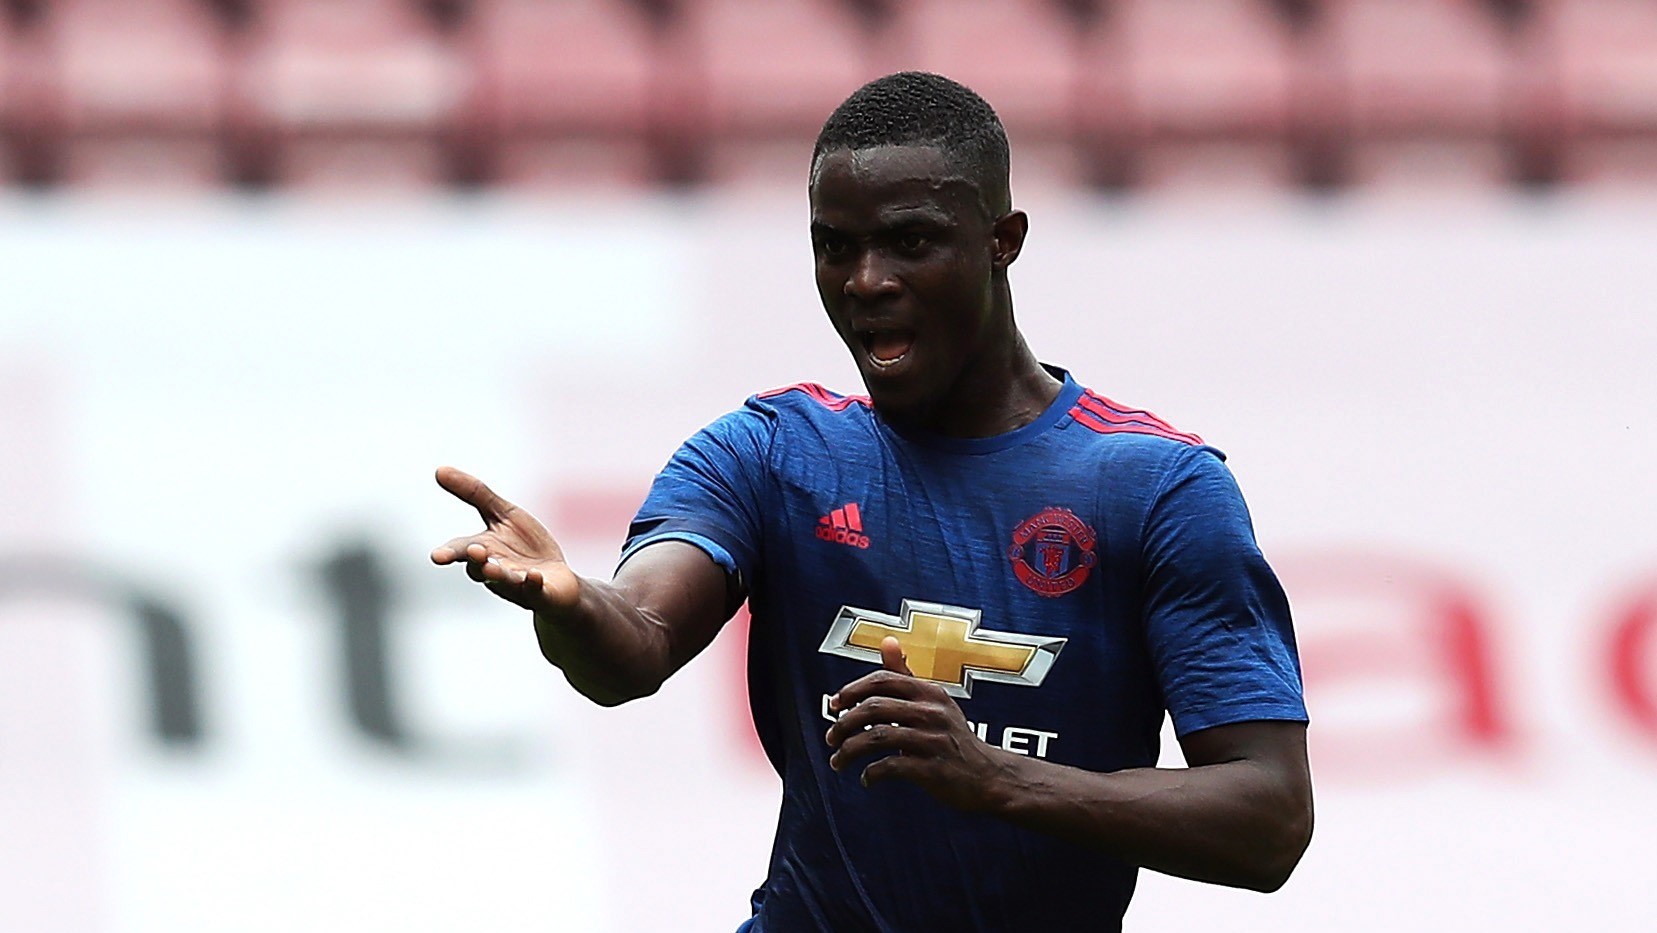 WIGAN, ENGLAND - JULY 16: Eric Bailly of Manchester United in action during the pre season friendly match between Wigan Athletic and Manchester United at the JJB Stadium on July 16, 2016 in Wigan, England. (Photo by Chris Brunskill/Getty Images)